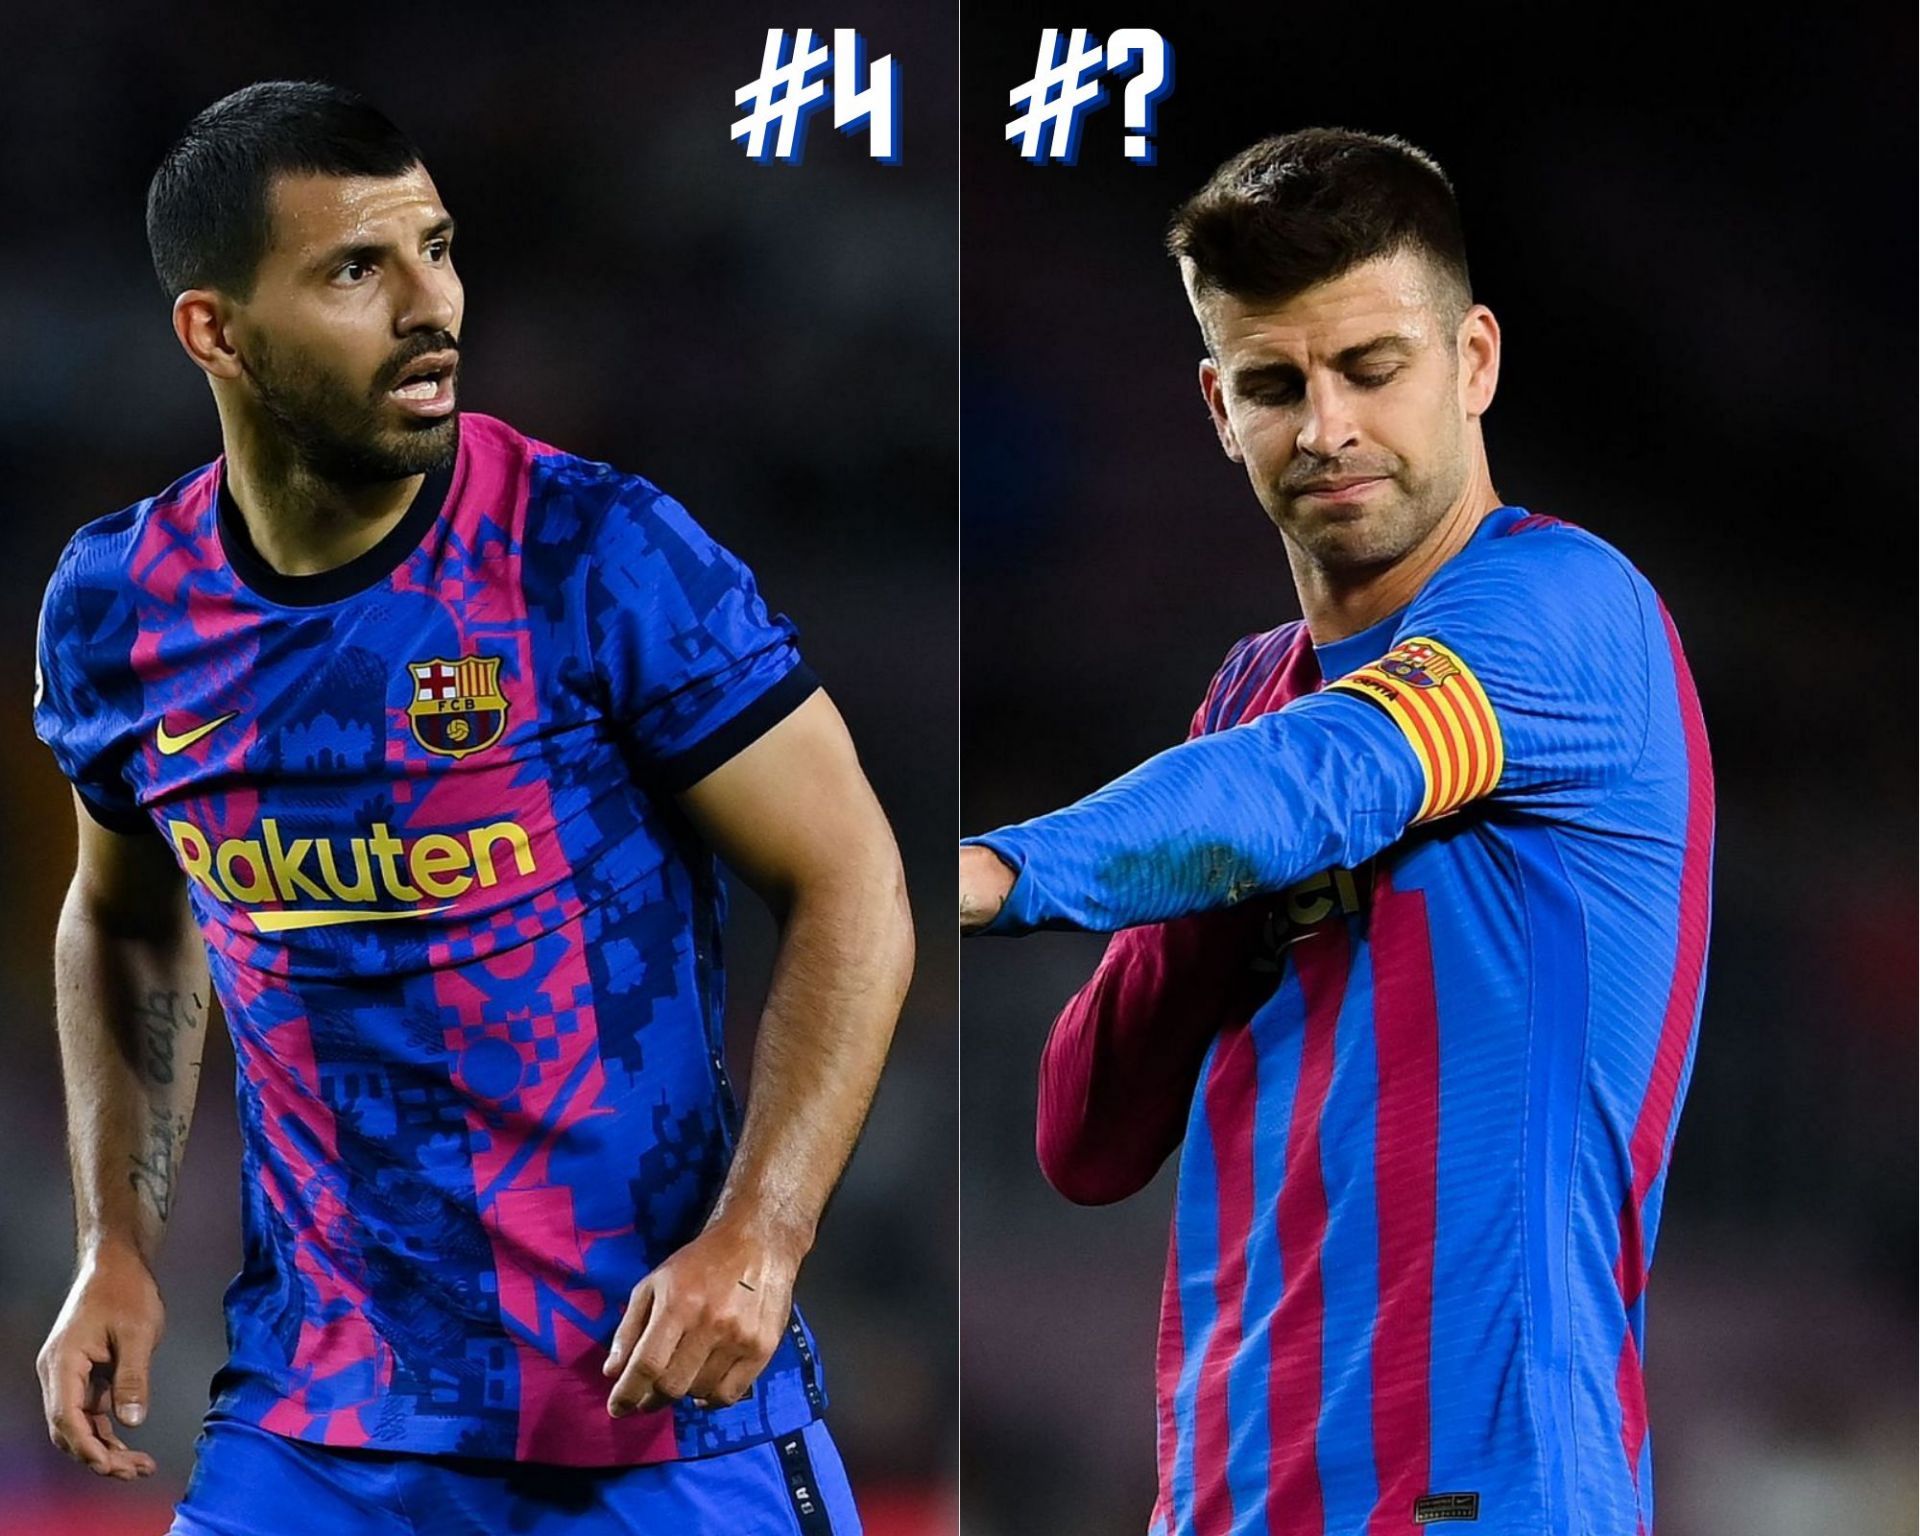 Top 5 current Barcelona players who have won the most career trophies